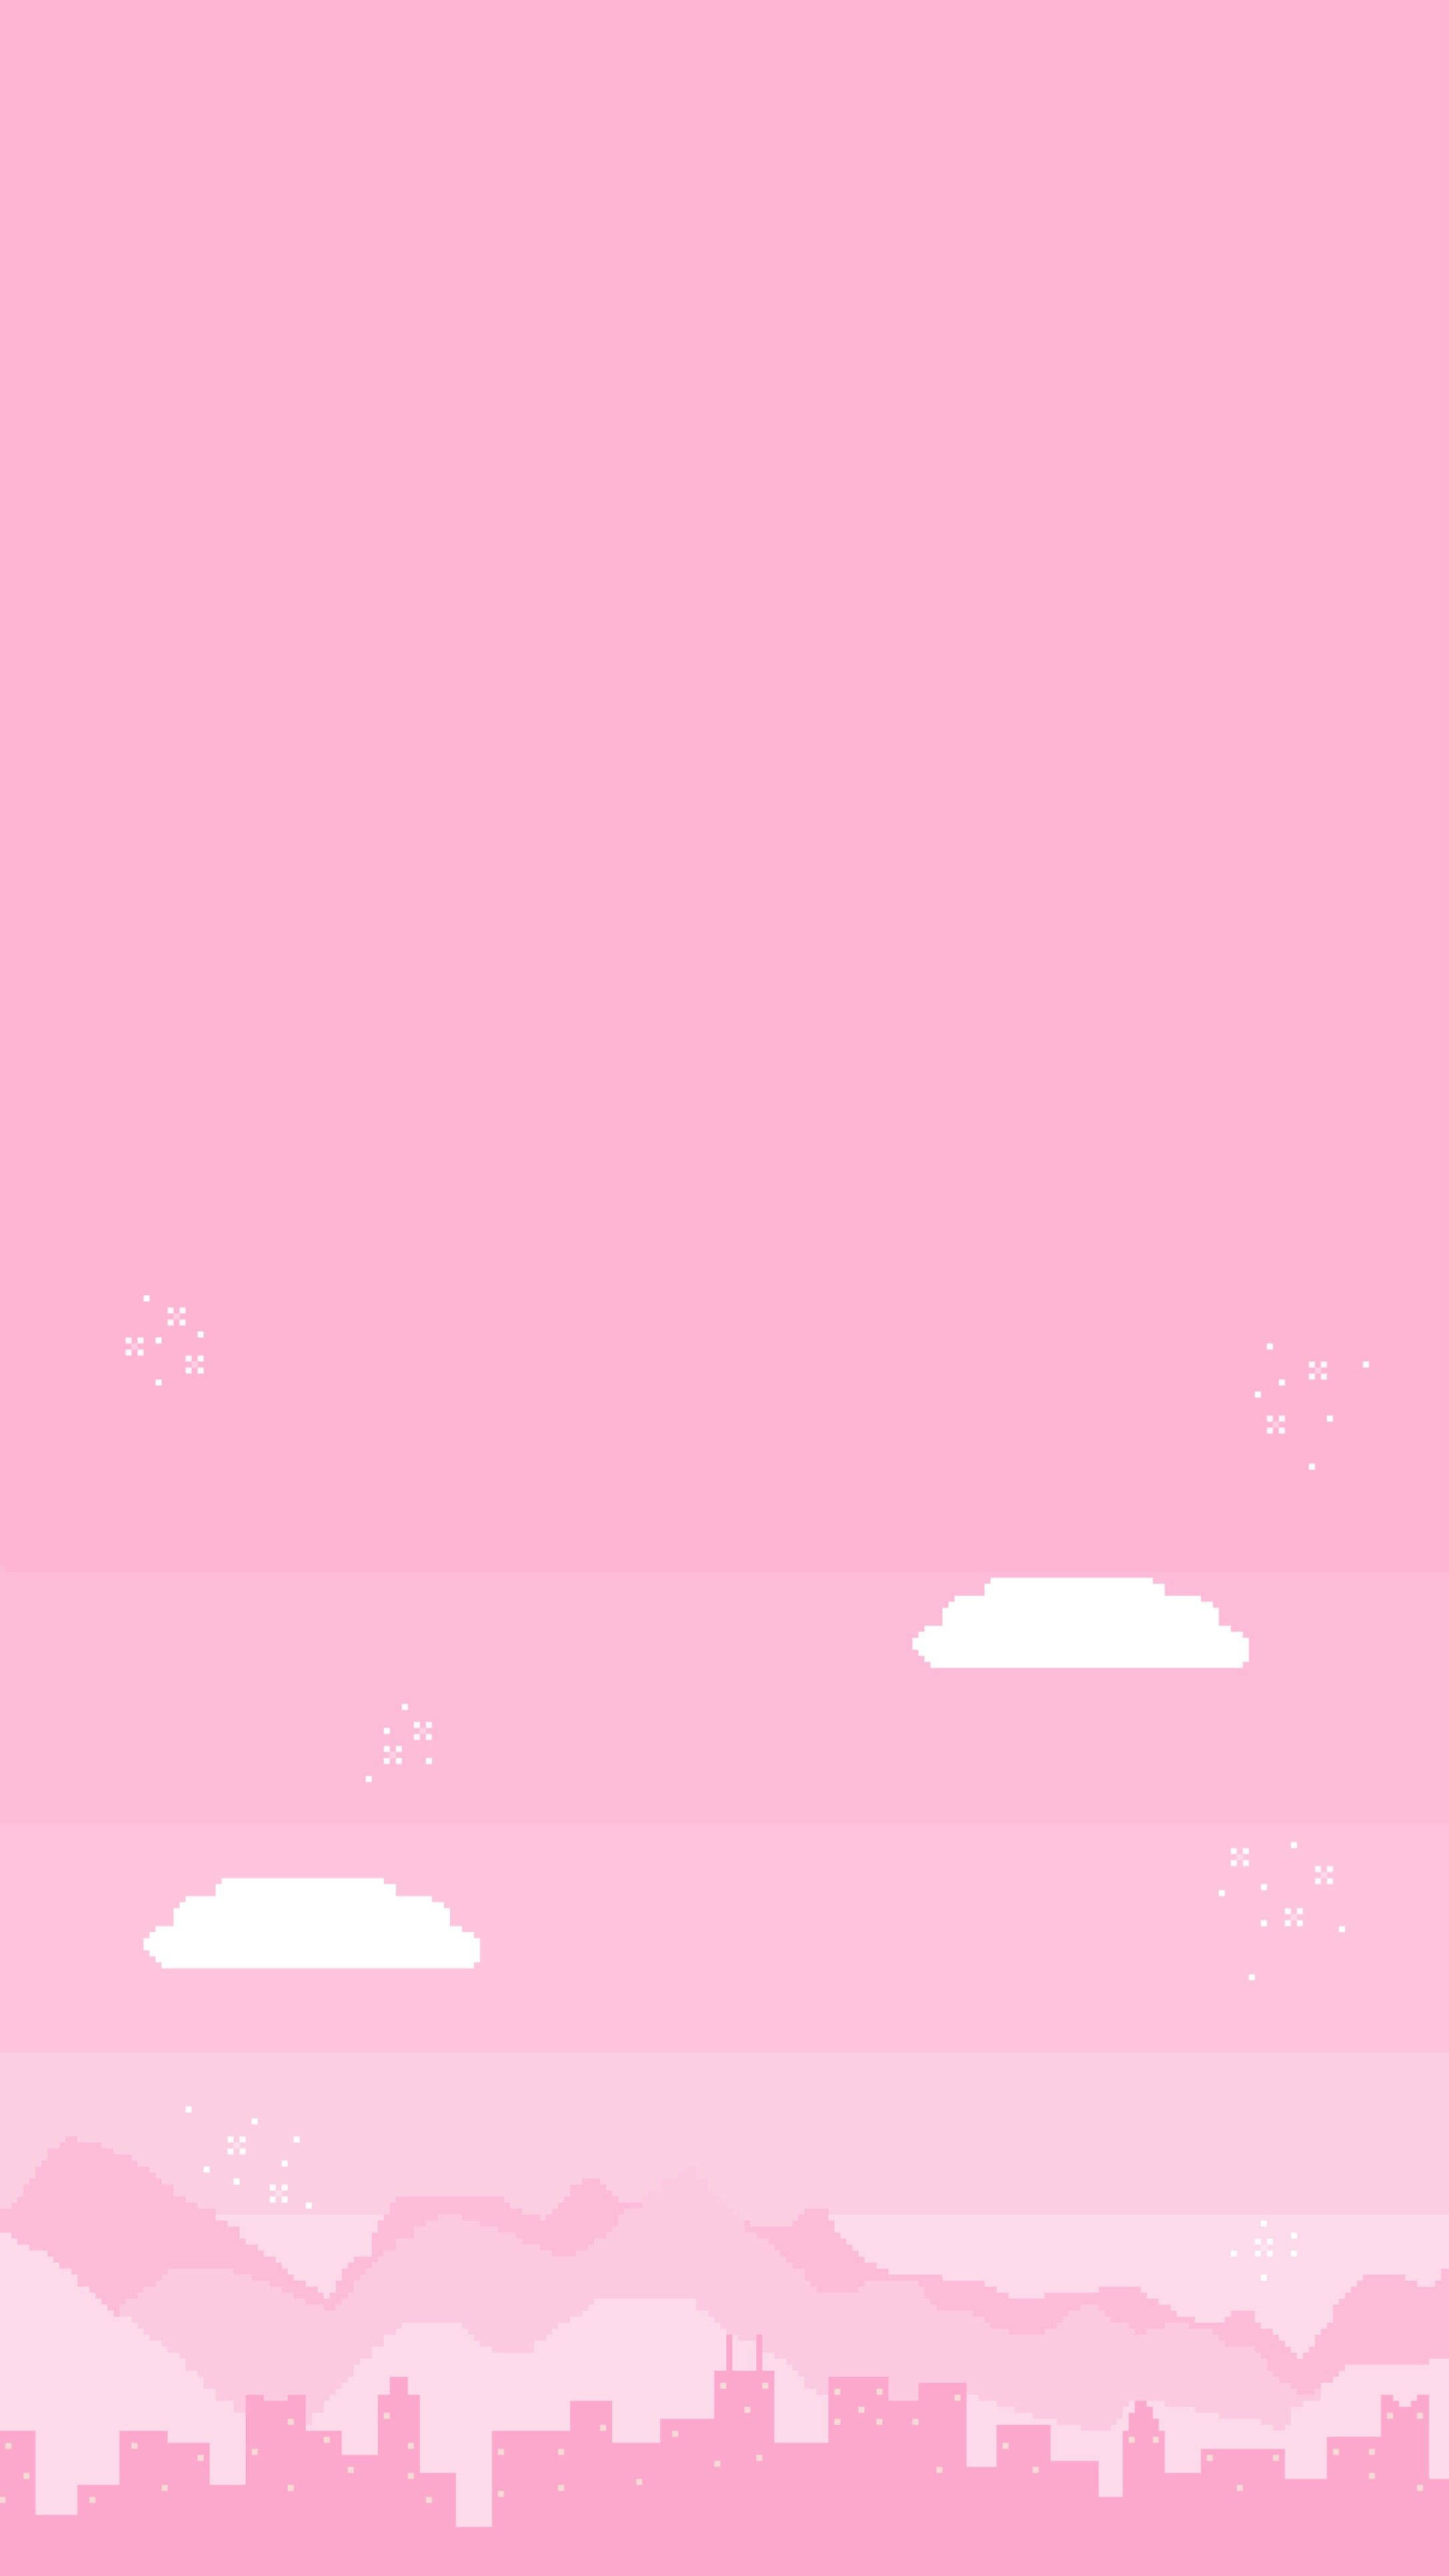 Cute Pink Aesthetic Mountains And Building Silhouettes Background